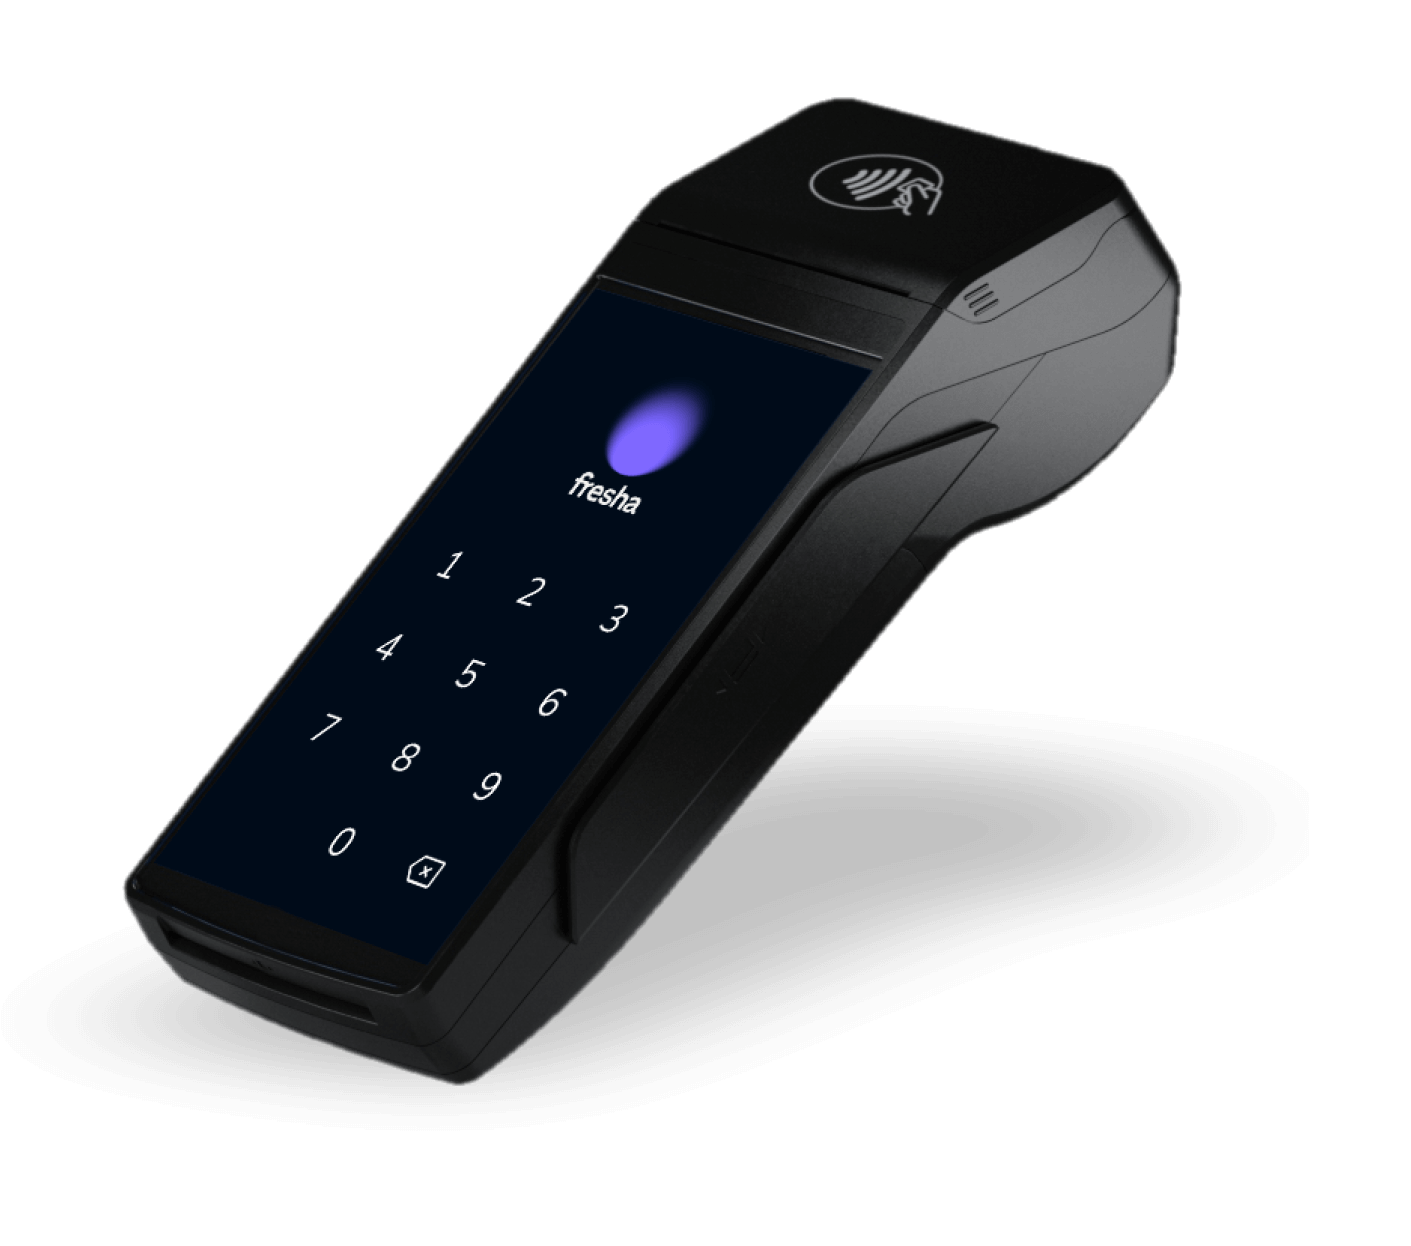 Apple watch and Card terminal with golden visa card inserted and FRESHA logo on its screen